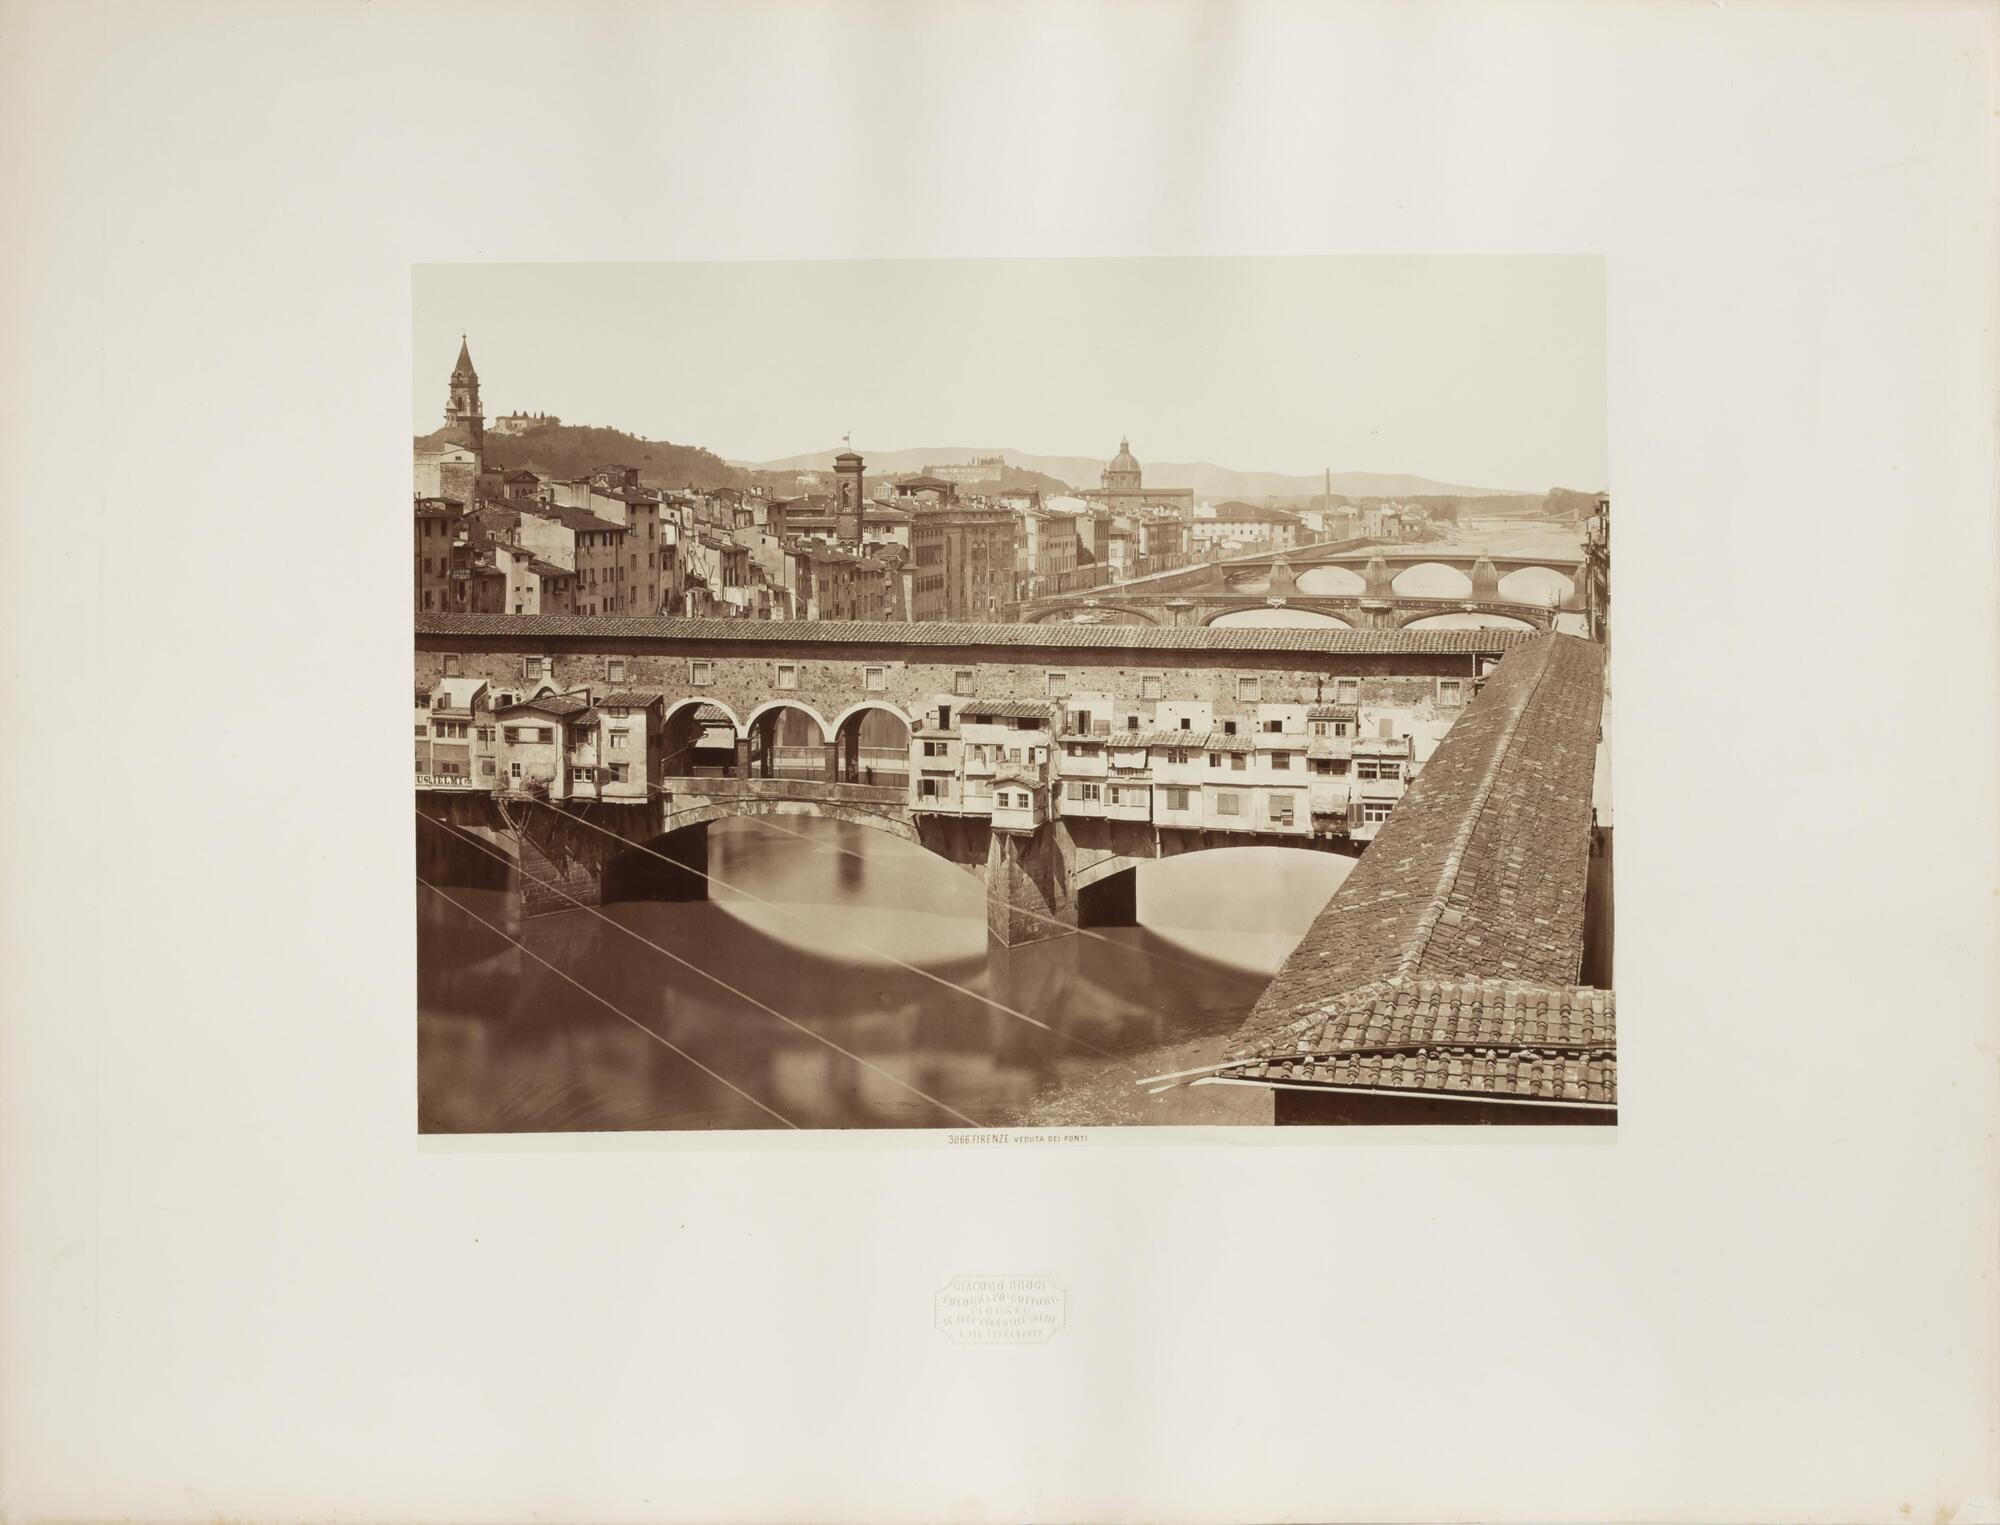 This image depicts a scenic view of three bridges spanning a river that runs through the medieval city of Florence.